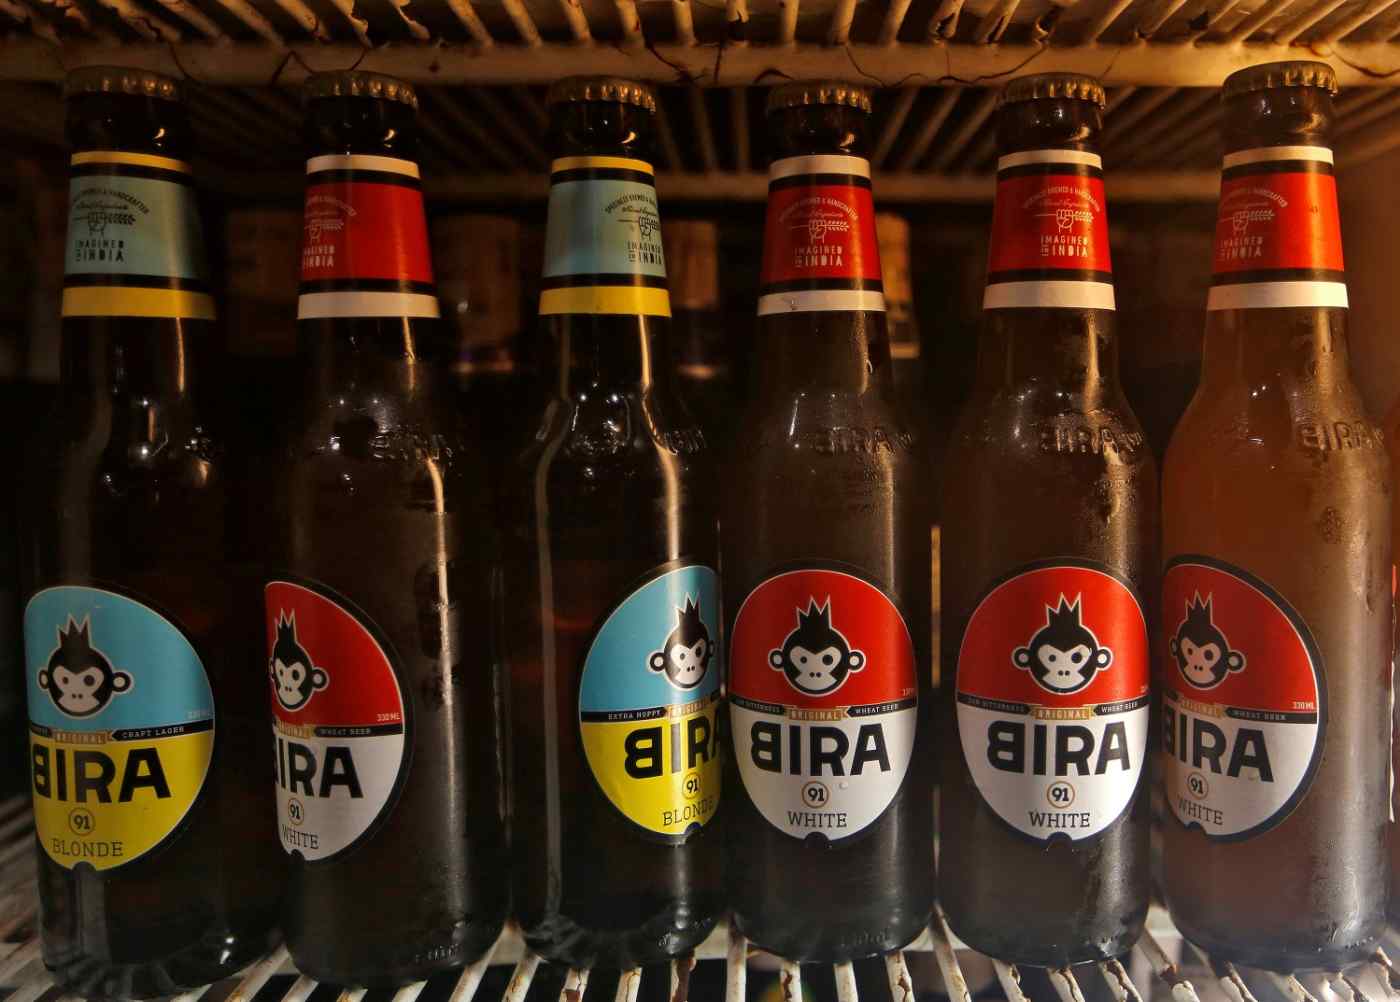 Domestic beer brand Bira is gaining popularity in thirsty India.